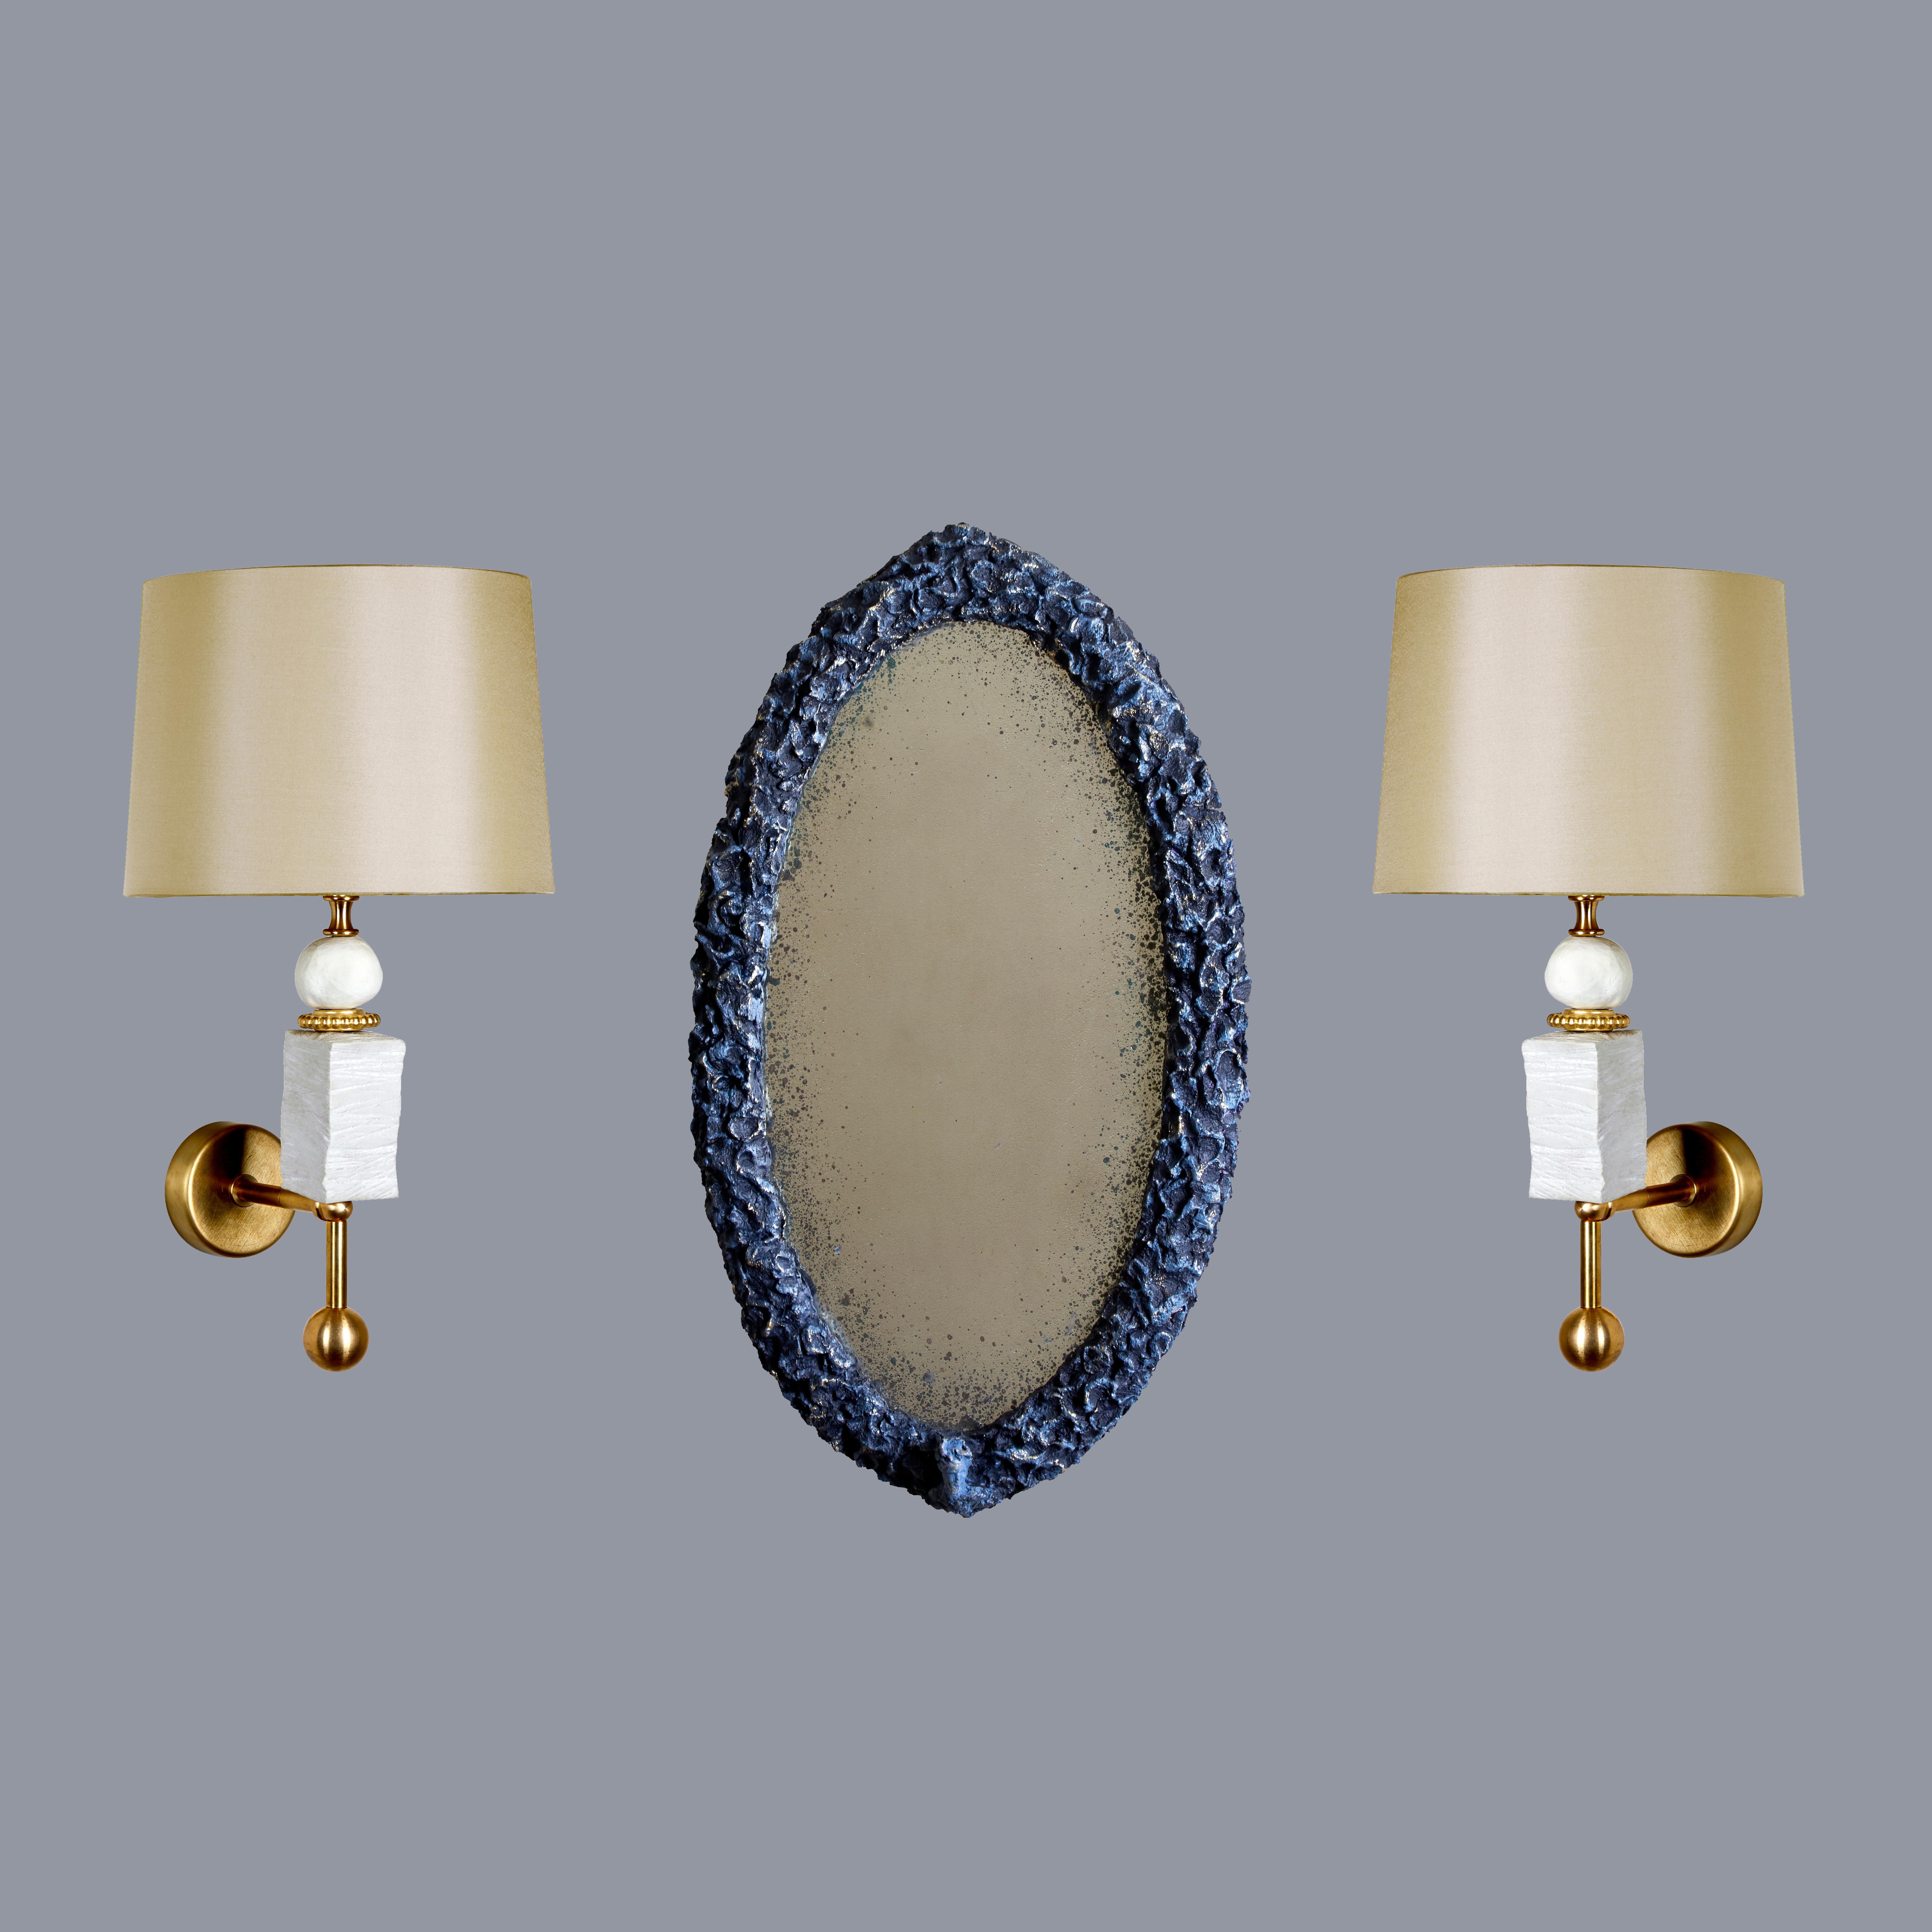 Cast Contemporary Oval Sculpted Mirror in Slate Grey by Margit Wittig